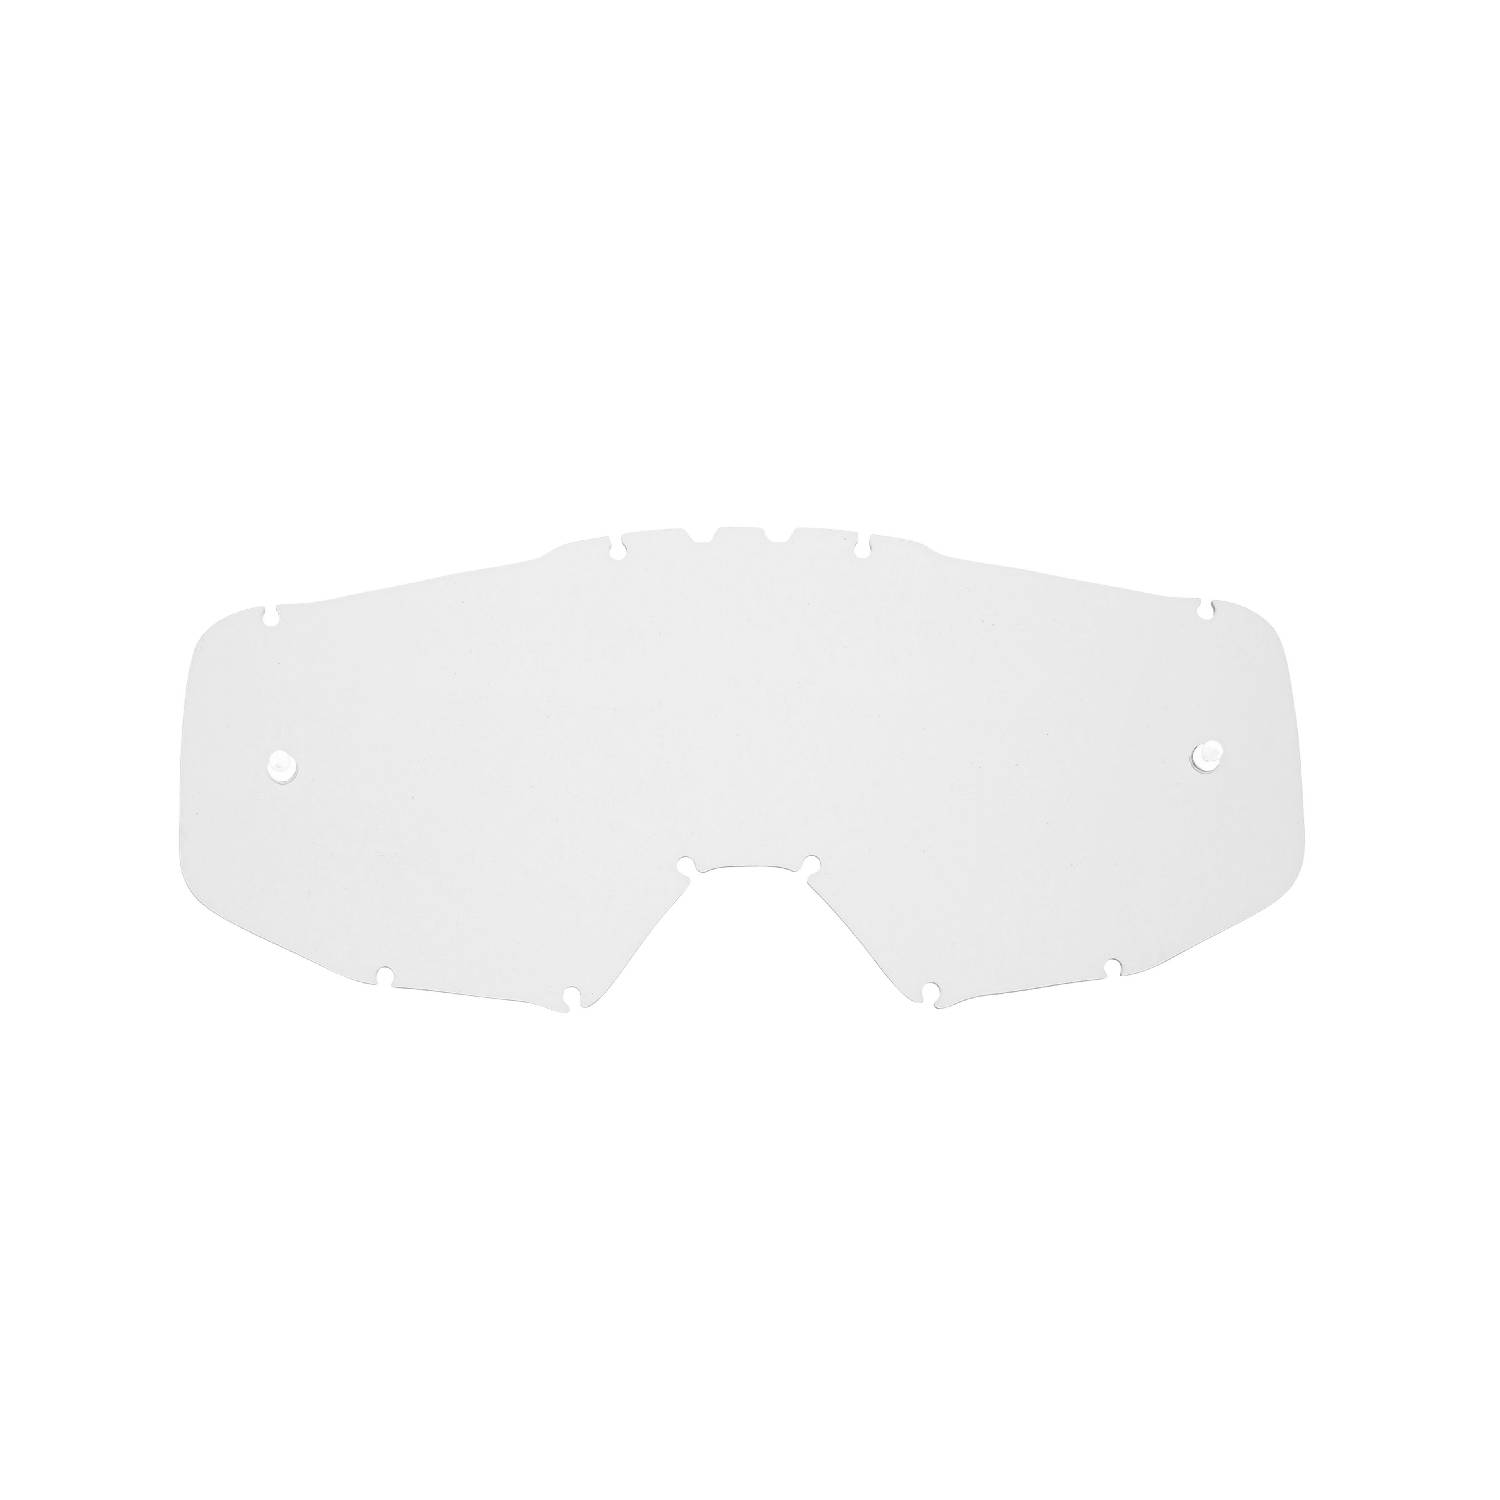 clear replacement lenses for goggles compatible for Just1 Iris / Vitro goggle